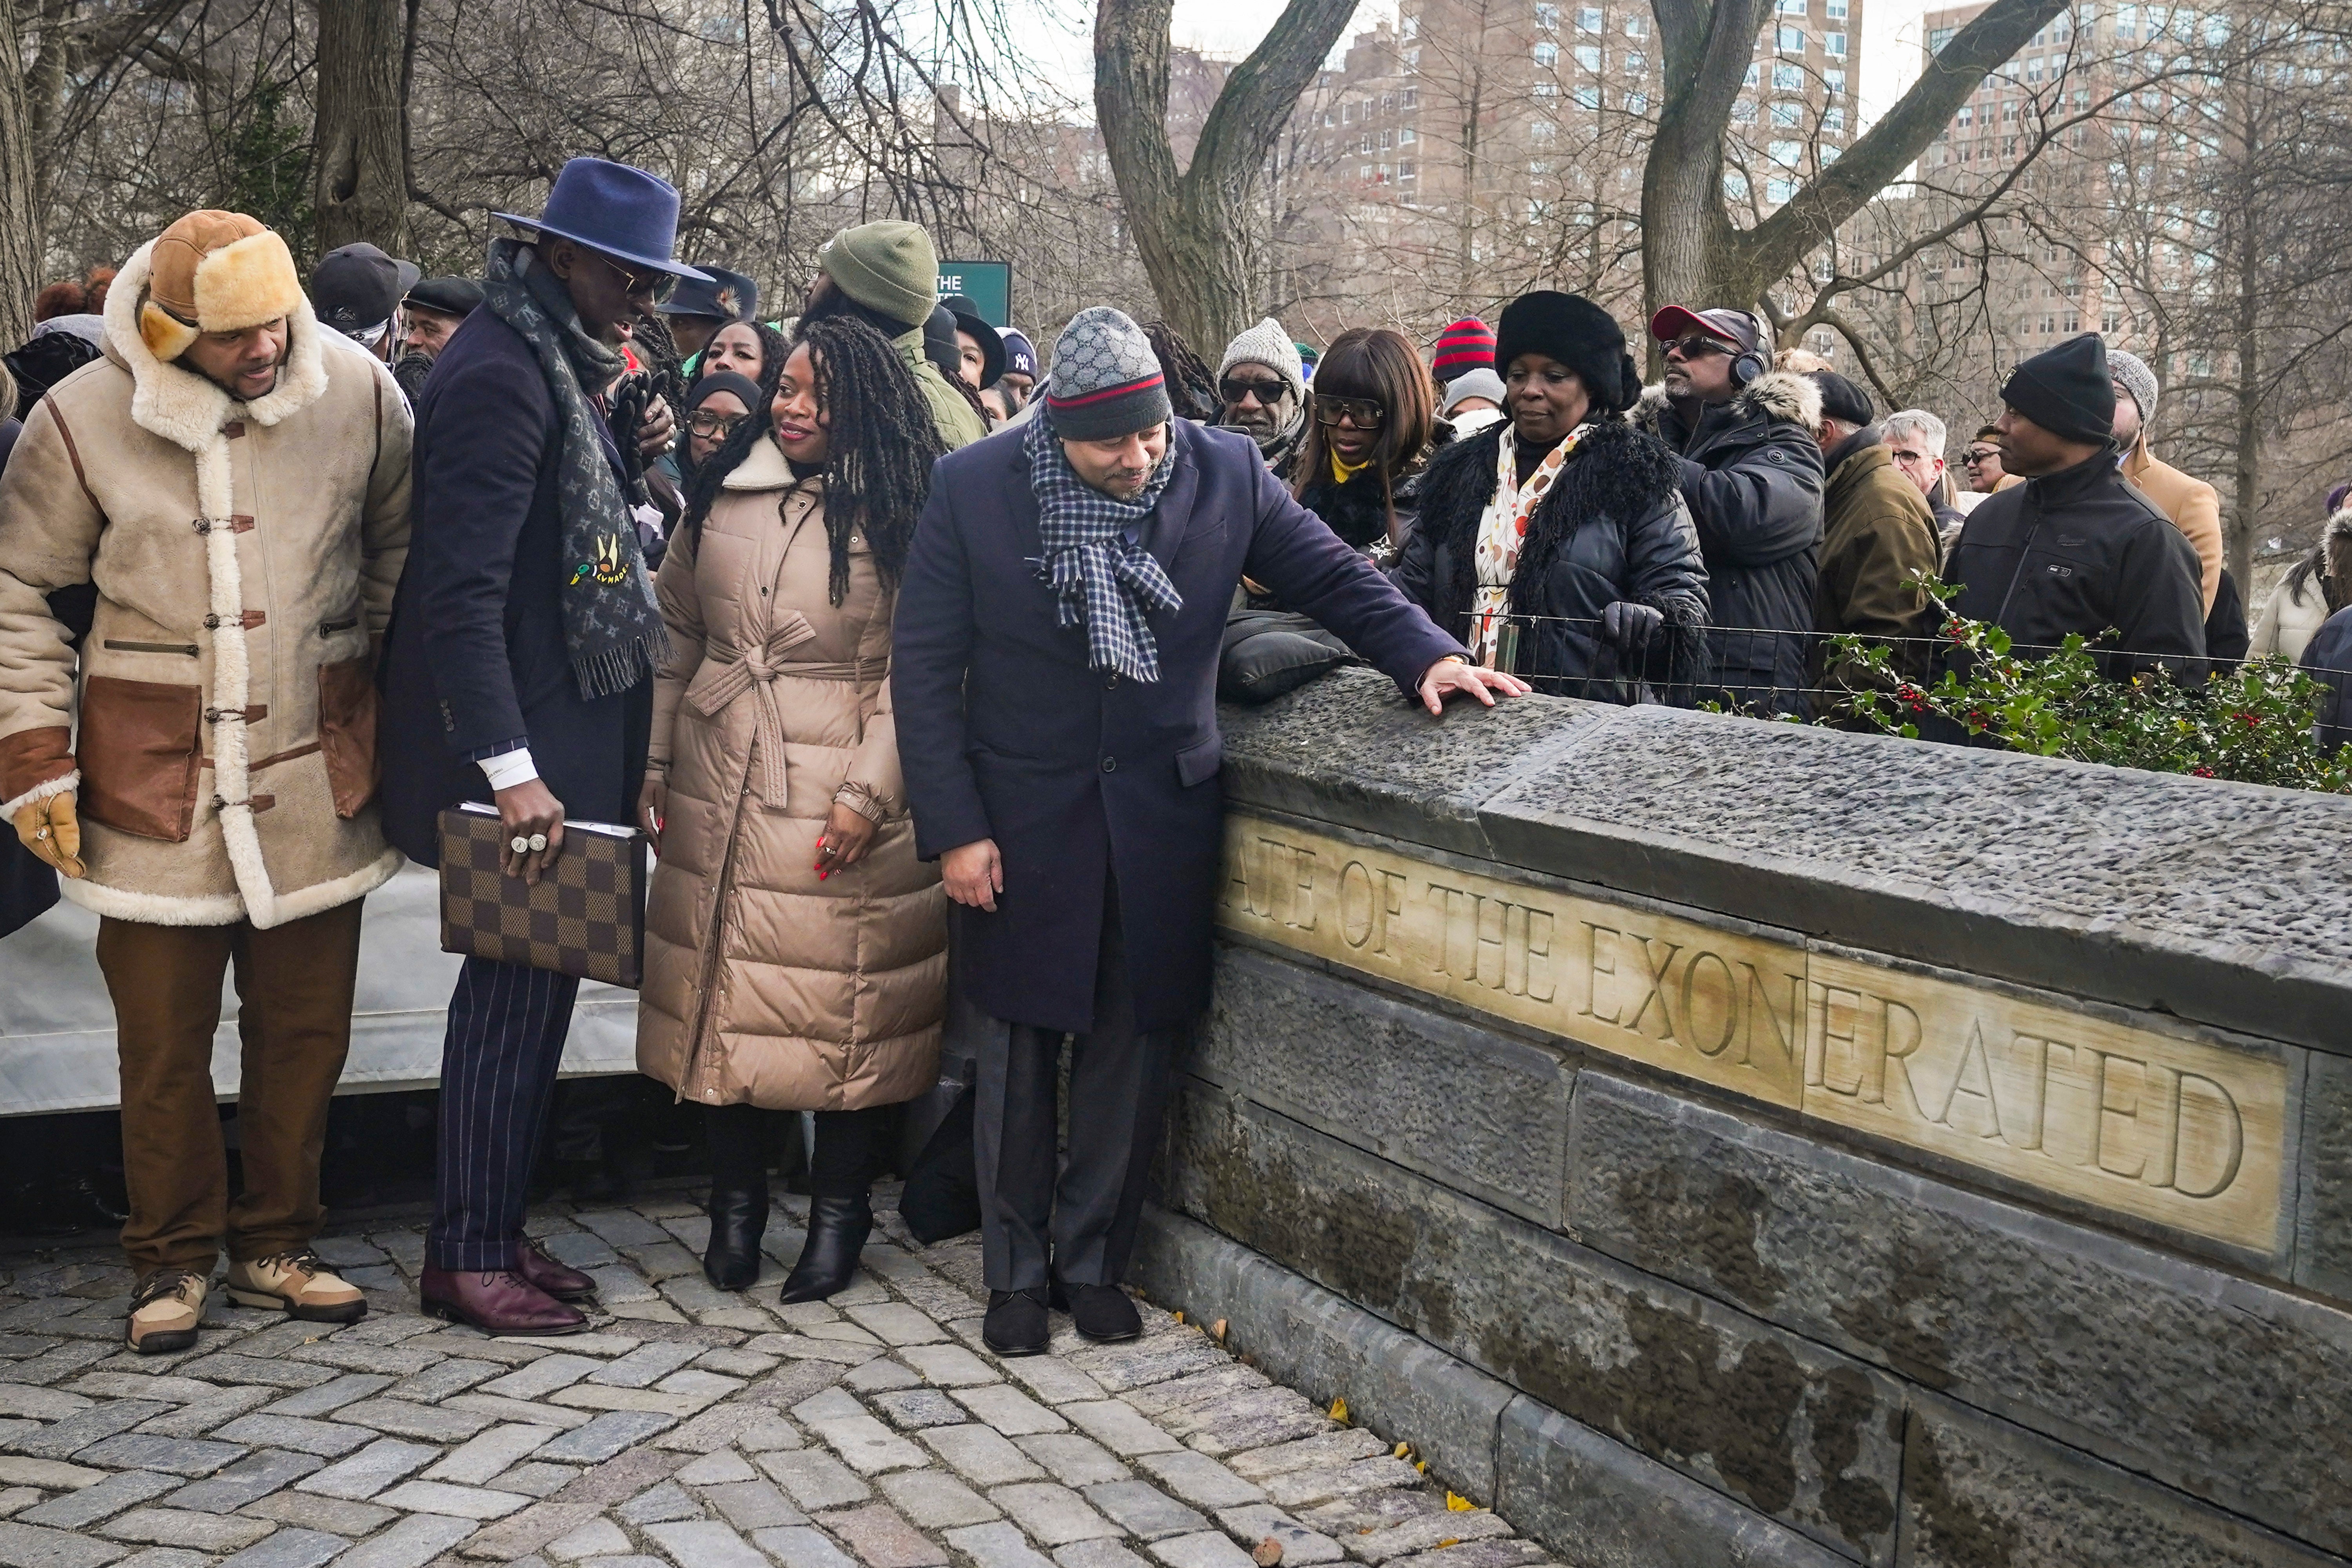 Kevin Richardson, far left, Yusef Salaam, second left, and Raymond Santana, far right in foreground, unveil the ‘The Gate of the Exonerated’ in Central Park in 2022